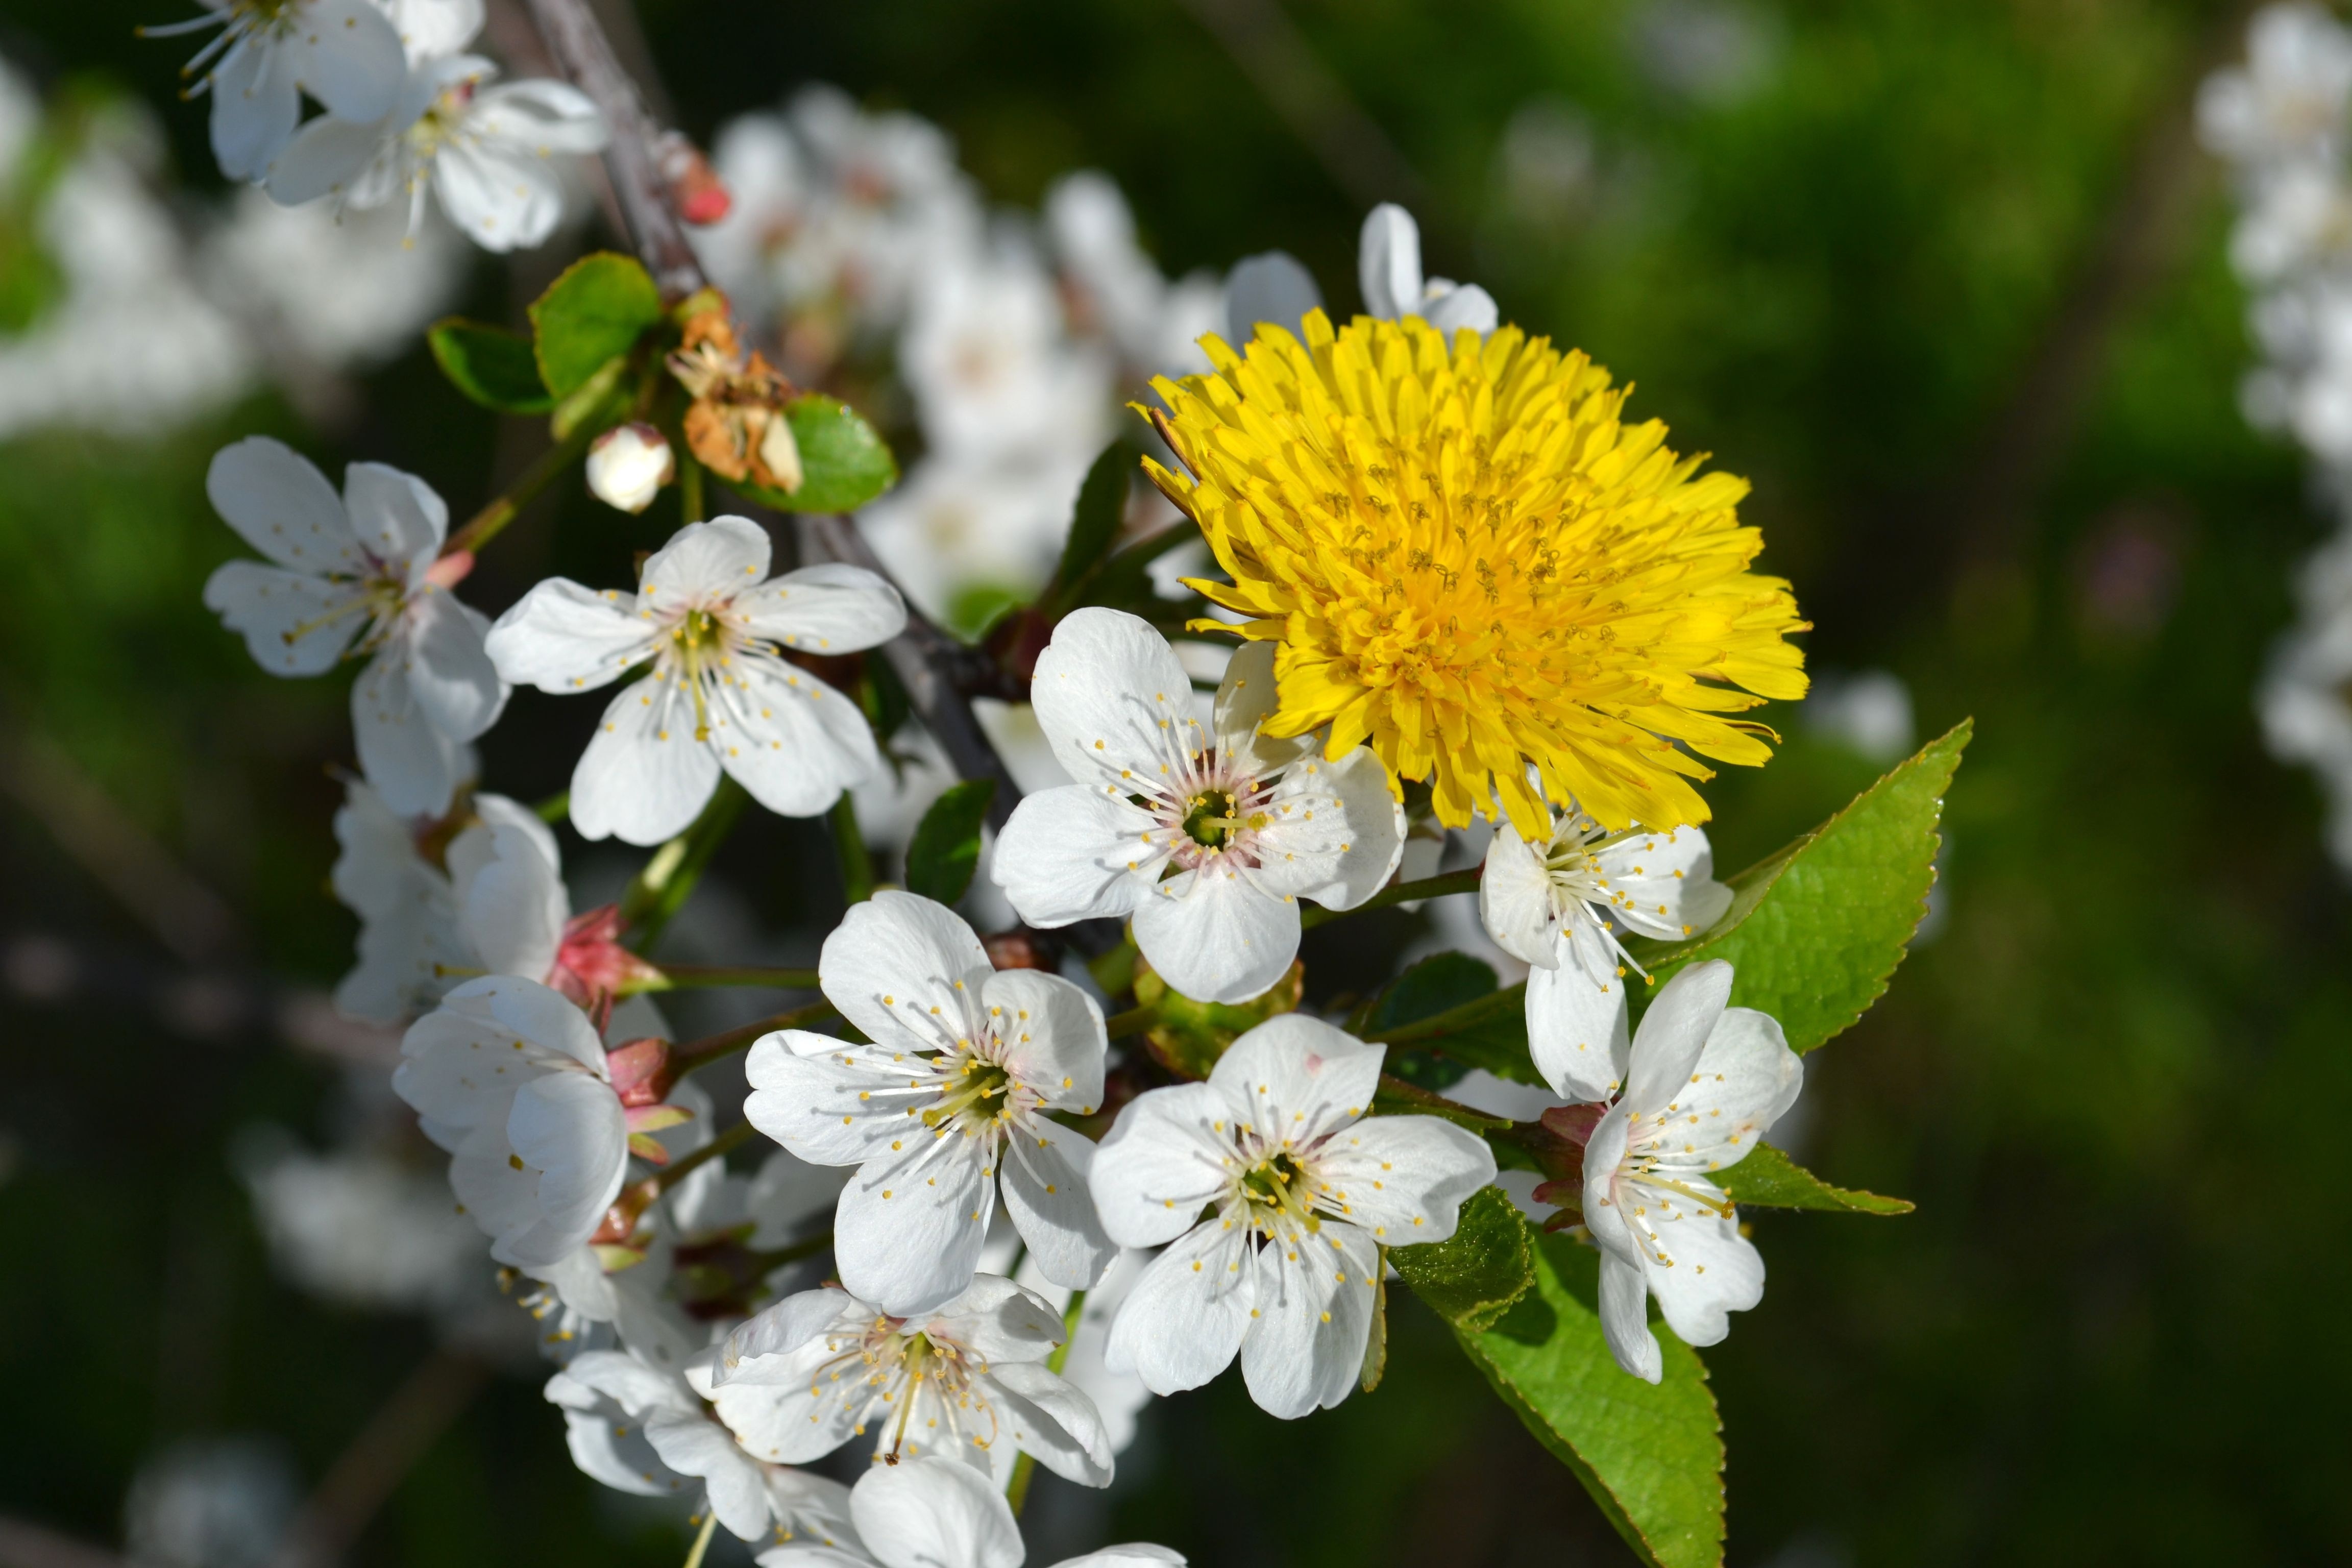 yellow petaled flower and white petaled flowers